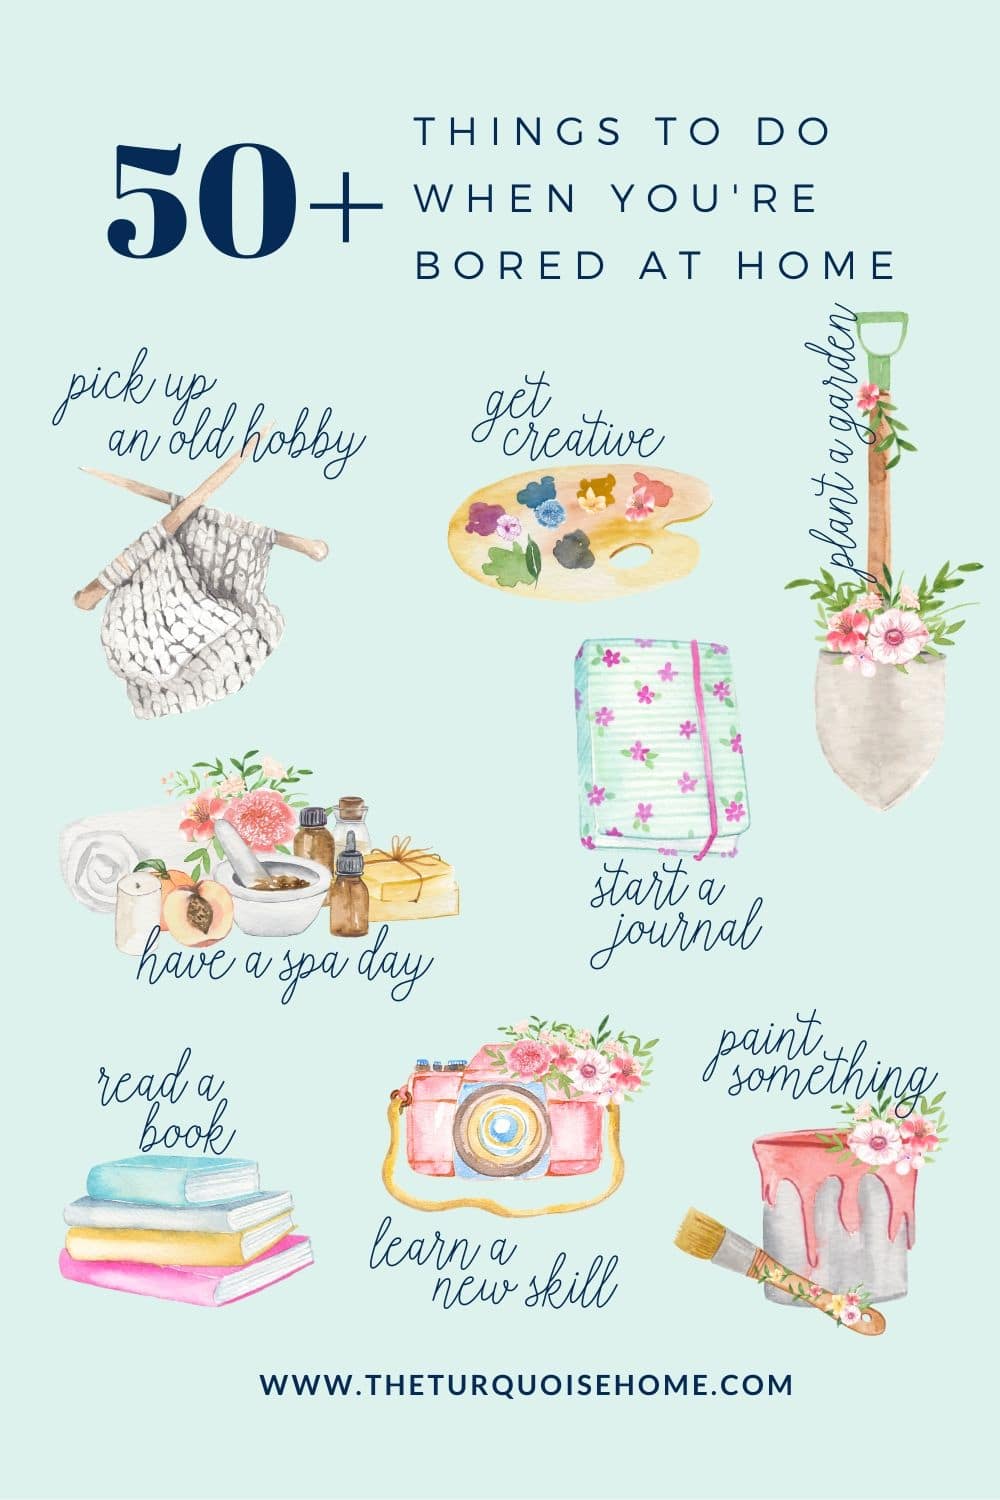 50+ Things to Do When You’re Bored at Home